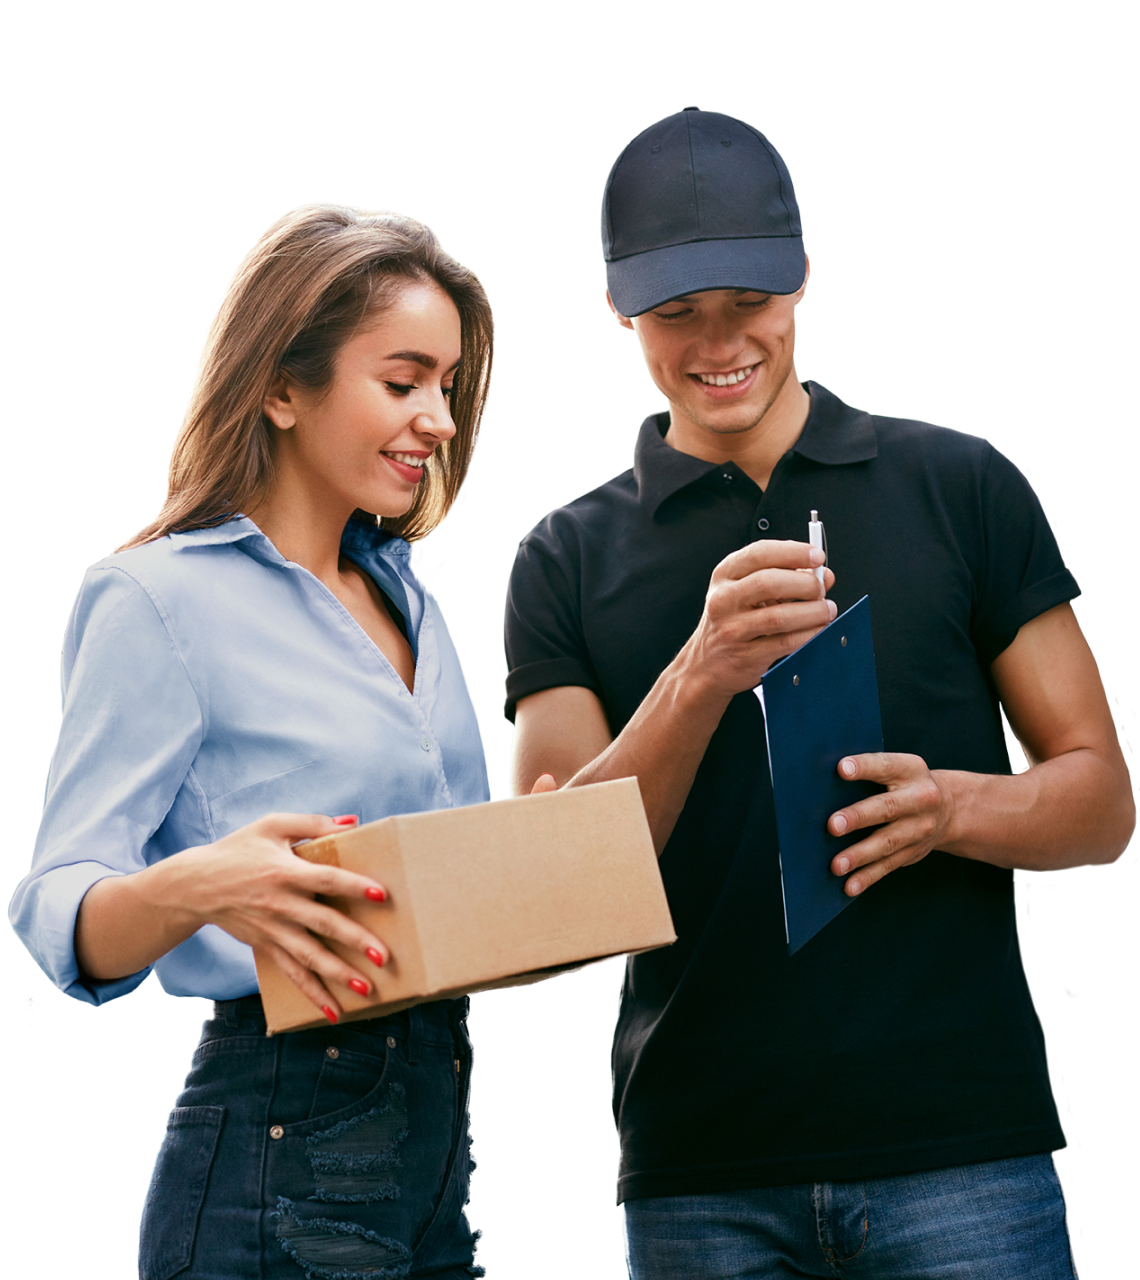 Delivery Courier service in New Delhi - fast couriers - borzo delivery